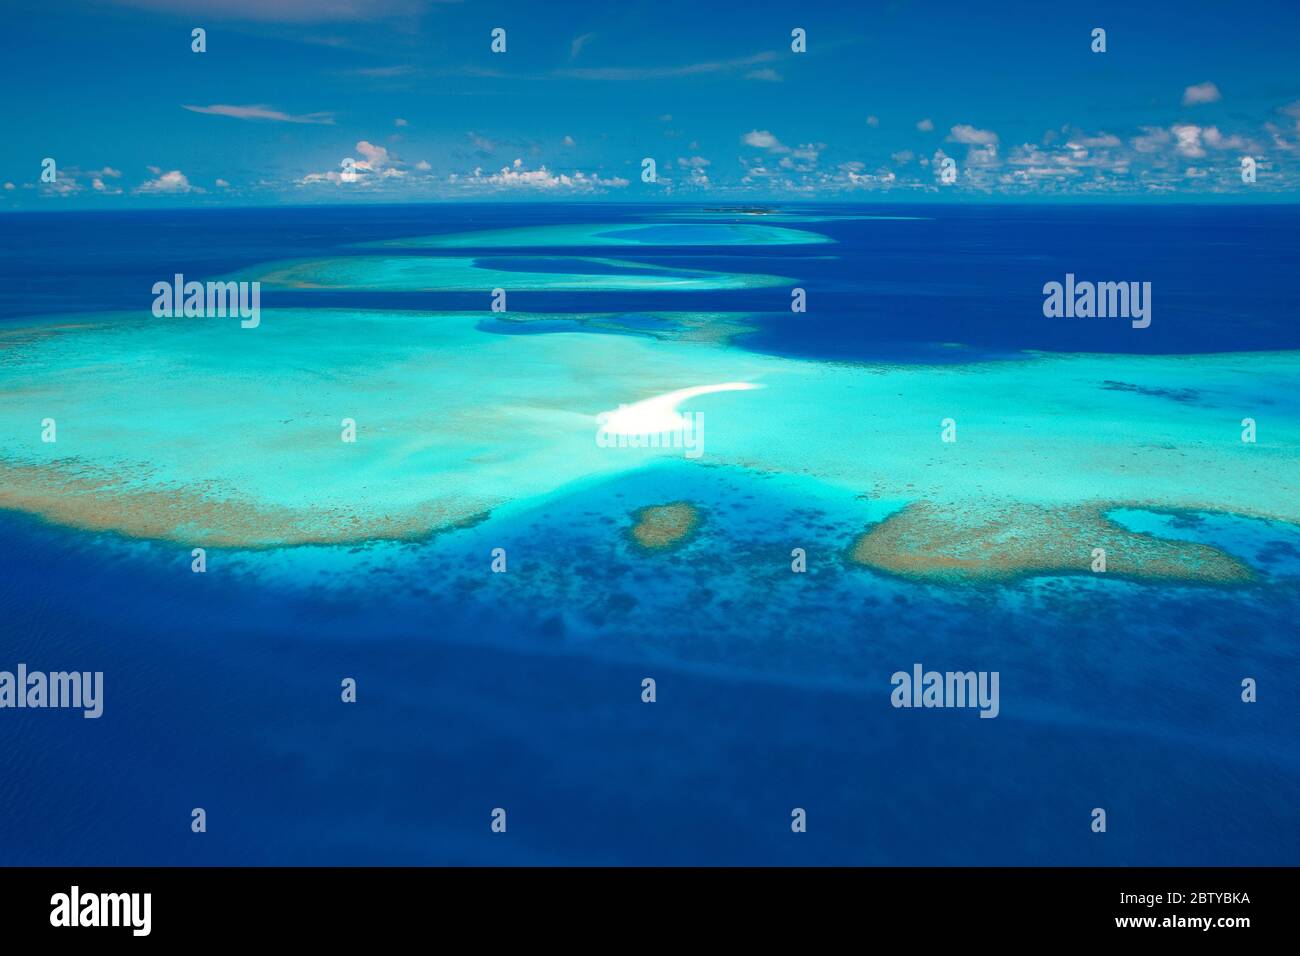 Aerial view of atolls and coral reefs, Maldives, Indian Ocean, Asia Stock Photo